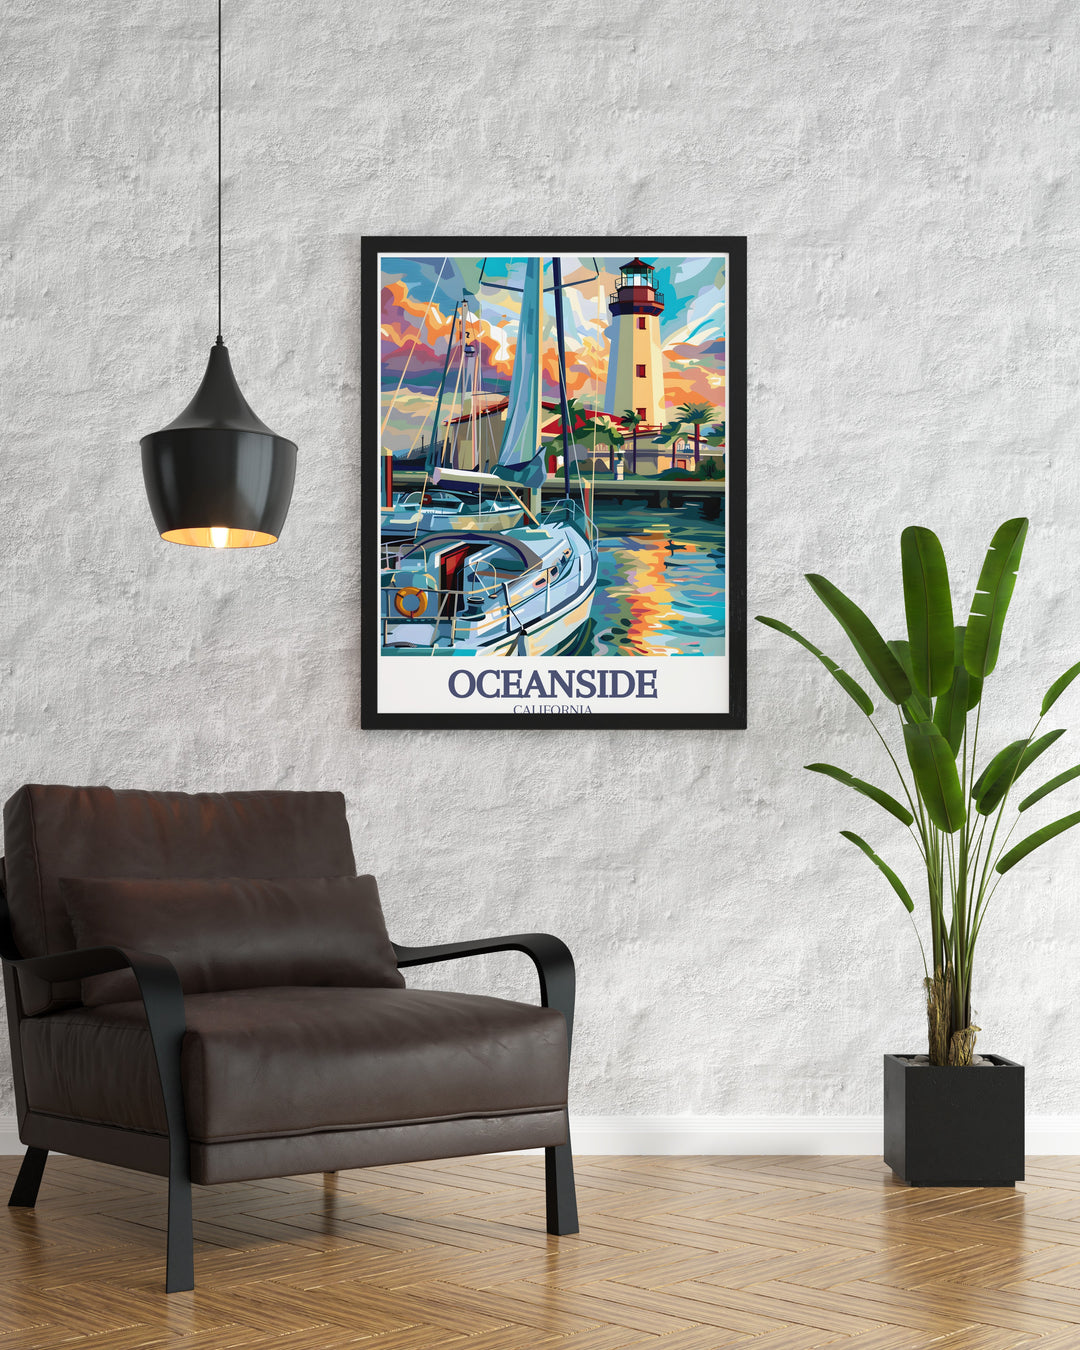 Captivating illustration of Oceanside Harbor Lighthouse in a vintage style print bringing the peaceful vibes of Oceanside Harbor to your home perfect for those who cherish coastal landscapes and unique decor